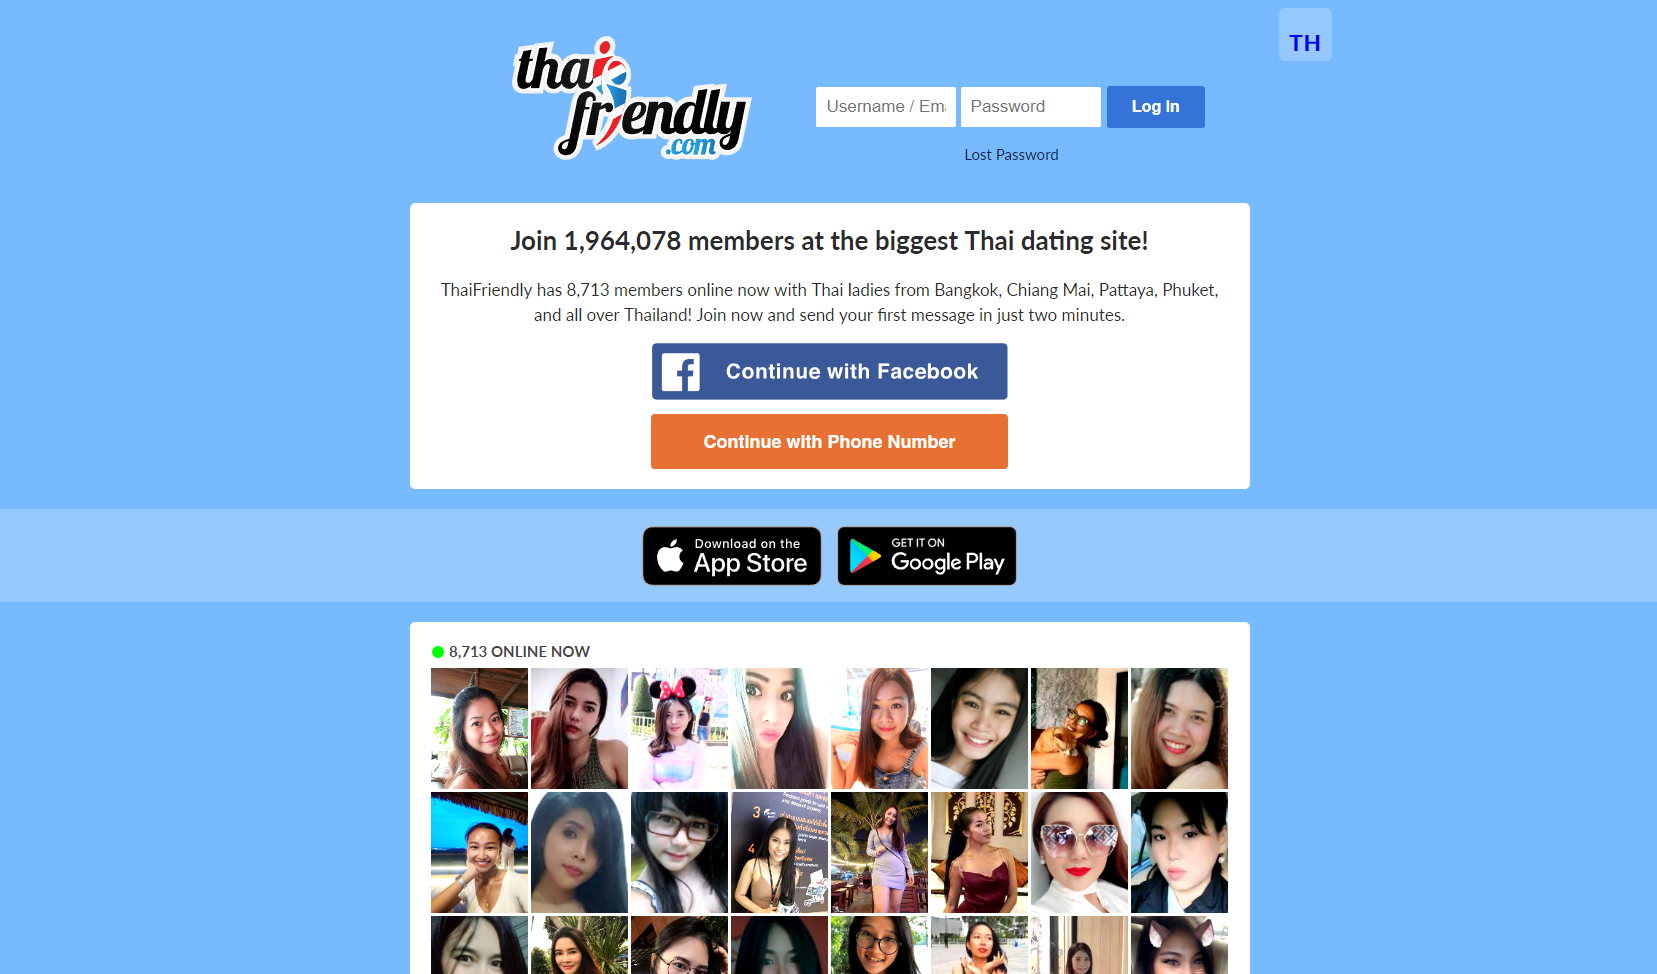 Thaifriendly Review 2020: Is This Legit Dating Site? Check Out